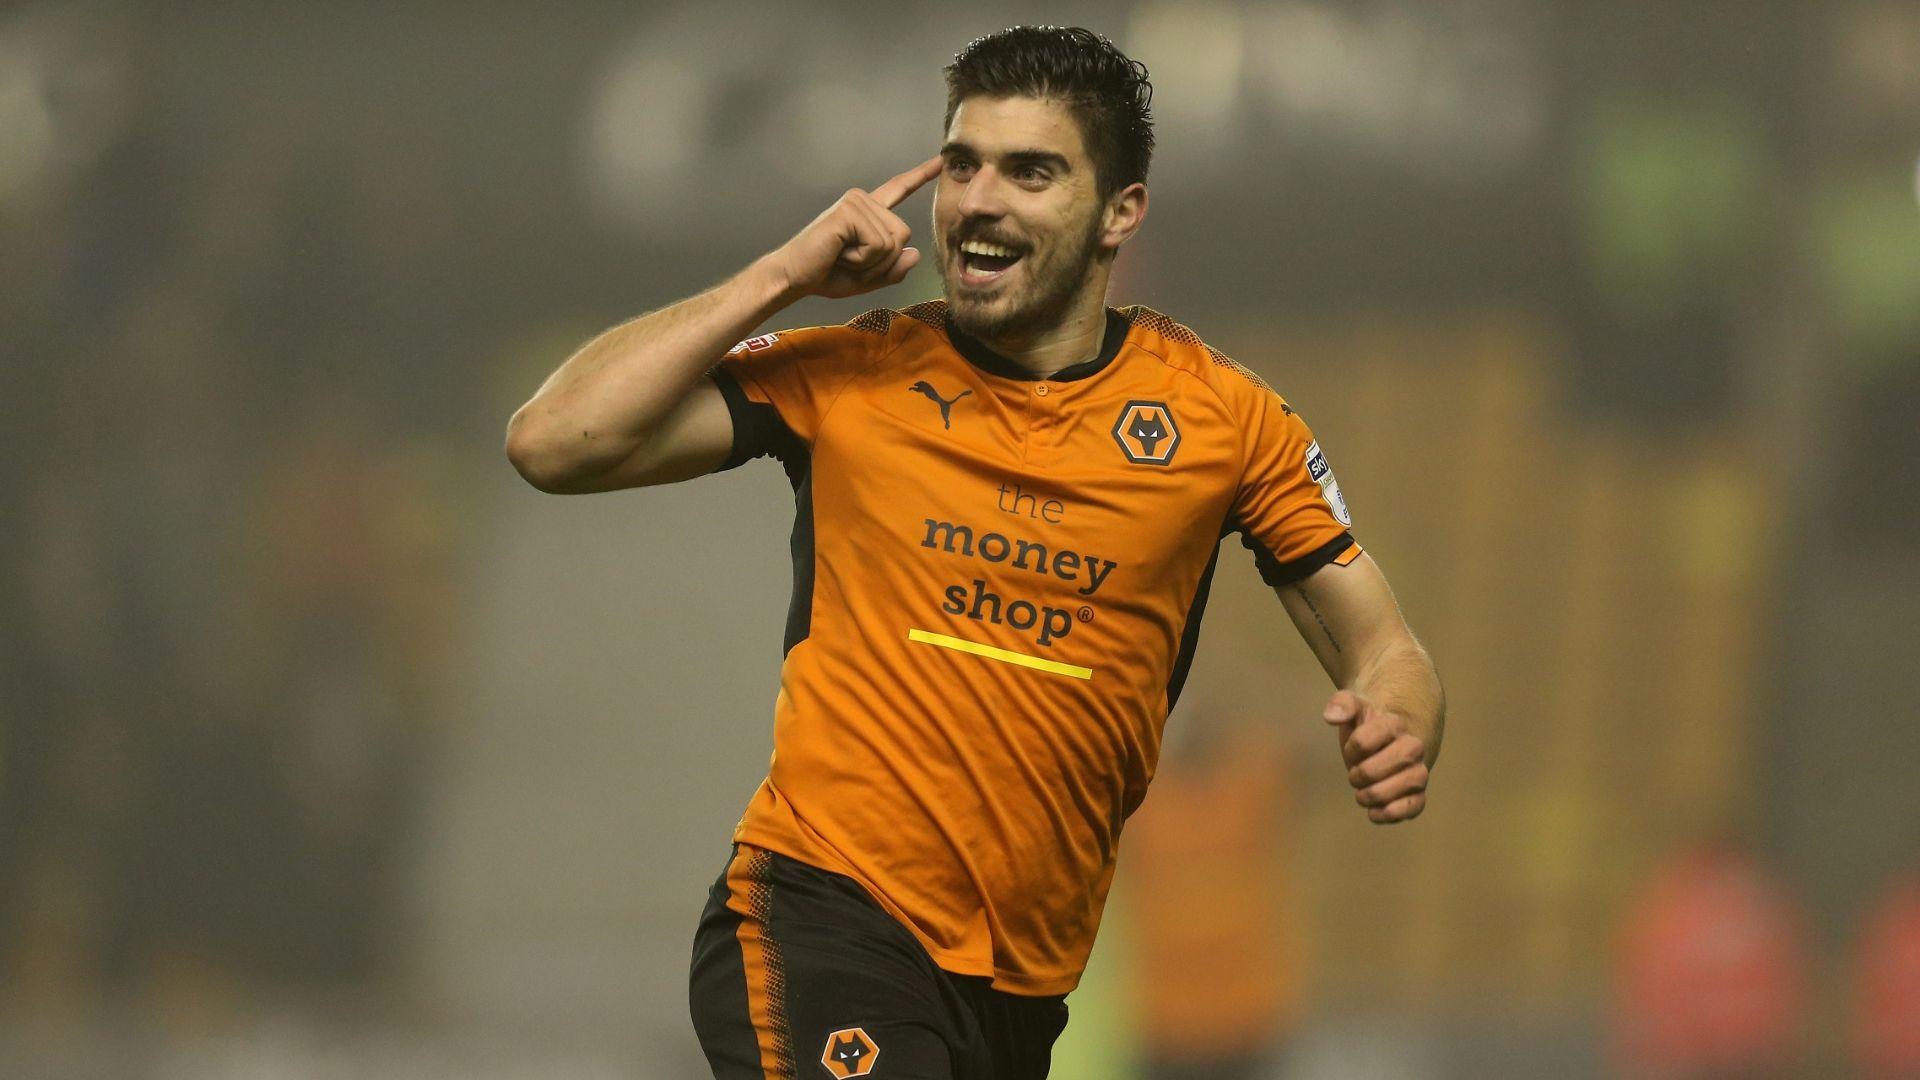 Wolves midfielder Ruben Neves signs contract extension at Premier